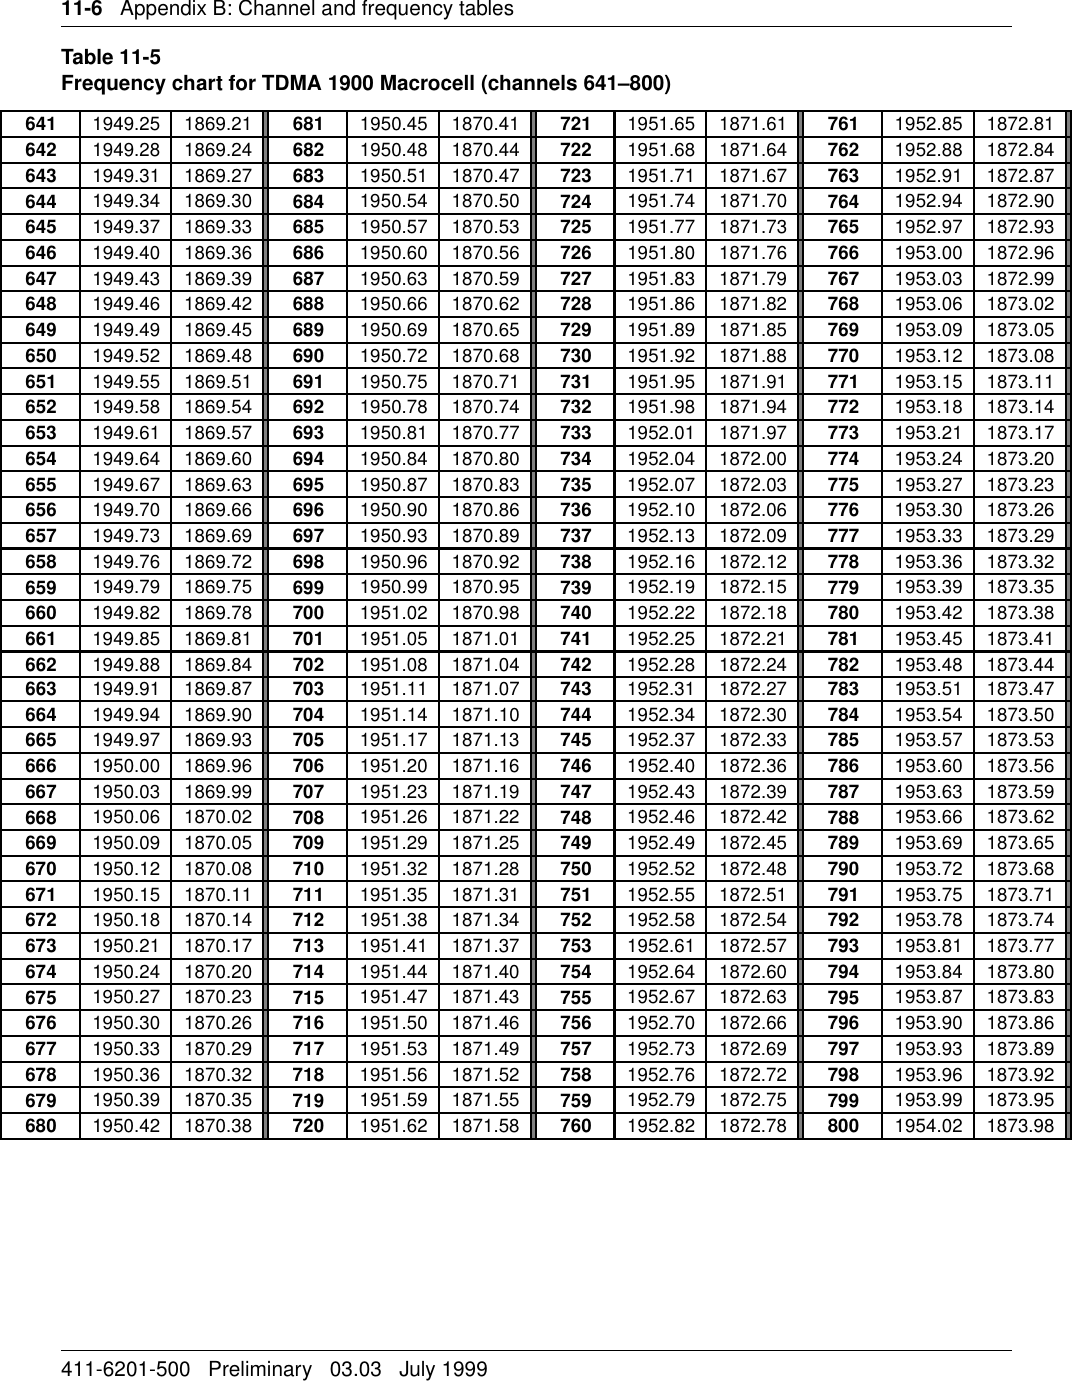 11-6   Appendix B: Channel and frequency tables411-6201-500   Preliminary   03.03   July 1999Table 11-5Frequency chart for TDMA 1900 Macrocell (channels 641–800)641 1949.25 1869.21 681 1950.45 1870.41 721 1951.65 1871.61 761 1952.85 1872.81642 1949.28 1869.24 682 1950.48 1870.44 722 1951.68 1871.64 762 1952.88 1872.84643 1949.31 1869.27 683 1950.51 1870.47 723 1951.71 1871.67 763 1952.91 1872.87644 1949.34 1869.30 684 1950.54 1870.50 724 1951.74 1871.70 764 1952.94 1872.90645 1949.37 1869.33 685 1950.57 1870.53 725 1951.77 1871.73 765 1952.97 1872.93646 1949.40 1869.36 686 1950.60 1870.56 726 1951.80 1871.76 766 1953.00 1872.96647 1949.43 1869.39 687 1950.63 1870.59 727 1951.83 1871.79 767 1953.03 1872.99648 1949.46 1869.42 688 1950.66 1870.62 728 1951.86 1871.82 768 1953.06 1873.02649 1949.49 1869.45 689 1950.69 1870.65 729 1951.89 1871.85 769 1953.09 1873.05650 1949.52 1869.48 690 1950.72 1870.68 730 1951.92 1871.88 770 1953.12 1873.08651 1949.55 1869.51 691 1950.75 1870.71 731 1951.95 1871.91 771 1953.15 1873.11652 1949.58 1869.54 692 1950.78 1870.74 732 1951.98 1871.94 772 1953.18 1873.14653 1949.61 1869.57 693 1950.81 1870.77 733 1952.01 1871.97 773 1953.21 1873.17654 1949.64 1869.60 694 1950.84 1870.80 734 1952.04 1872.00 774 1953.24 1873.20655 1949.67 1869.63 695 1950.87 1870.83 735 1952.07 1872.03 775 1953.27 1873.23656 1949.70 1869.66 696 1950.90 1870.86 736 1952.10 1872.06 776 1953.30 1873.26657 1949.73 1869.69 697 1950.93 1870.89 737 1952.13 1872.09 777 1953.33 1873.29658 1949.76 1869.72 698 1950.96 1870.92 738 1952.16 1872.12 778 1953.36 1873.32659 1949.79 1869.75 699 1950.99 1870.95 739 1952.19 1872.15 779 1953.39 1873.35660 1949.82 1869.78 700 1951.02 1870.98 740 1952.22 1872.18 780 1953.42 1873.38661 1949.85 1869.81 701 1951.05 1871.01 741 1952.25 1872.21 781 1953.45 1873.41662 1949.88 1869.84 702 1951.08 1871.04 742 1952.28 1872.24 782 1953.48 1873.44663 1949.91 1869.87 703 1951.11 1871.07 743 1952.31 1872.27 783 1953.51 1873.47664 1949.94 1869.90 704 1951.14 1871.10 744 1952.34 1872.30 784 1953.54 1873.50665 1949.97 1869.93 705 1951.17 1871.13 745 1952.37 1872.33 785 1953.57 1873.53666 1950.00 1869.96 706 1951.20 1871.16 746 1952.40 1872.36 786 1953.60 1873.56667 1950.03 1869.99 707 1951.23 1871.19 747 1952.43 1872.39 787 1953.63 1873.59668 1950.06 1870.02 708 1951.26 1871.22 748 1952.46 1872.42 788 1953.66 1873.62669 1950.09 1870.05 709 1951.29 1871.25 749 1952.49 1872.45 789 1953.69 1873.65670 1950.12 1870.08 710 1951.32 1871.28 750 1952.52 1872.48 790 1953.72 1873.68671 1950.15 1870.11 711 1951.35 1871.31 751 1952.55 1872.51 791 1953.75 1873.71672 1950.18 1870.14 712 1951.38 1871.34 752 1952.58 1872.54 792 1953.78 1873.74673 1950.21 1870.17 713 1951.41 1871.37 753 1952.61 1872.57 793 1953.81 1873.77674 1950.24 1870.20 714 1951.44 1871.40 754 1952.64 1872.60 794 1953.84 1873.80675 1950.27 1870.23 715 1951.47 1871.43 755 1952.67 1872.63 795 1953.87 1873.83676 1950.30 1870.26 716 1951.50 1871.46 756 1952.70 1872.66 796 1953.90 1873.86677 1950.33 1870.29 717 1951.53 1871.49 757 1952.73 1872.69 797 1953.93 1873.89678 1950.36 1870.32 718 1951.56 1871.52 758 1952.76 1872.72 798 1953.96 1873.92679 1950.39 1870.35 719 1951.59 1871.55 759 1952.79 1872.75 799 1953.99 1873.95680 1950.42 1870.38 720 1951.62 1871.58 760 1952.82 1872.78 800 1954.02 1873.98